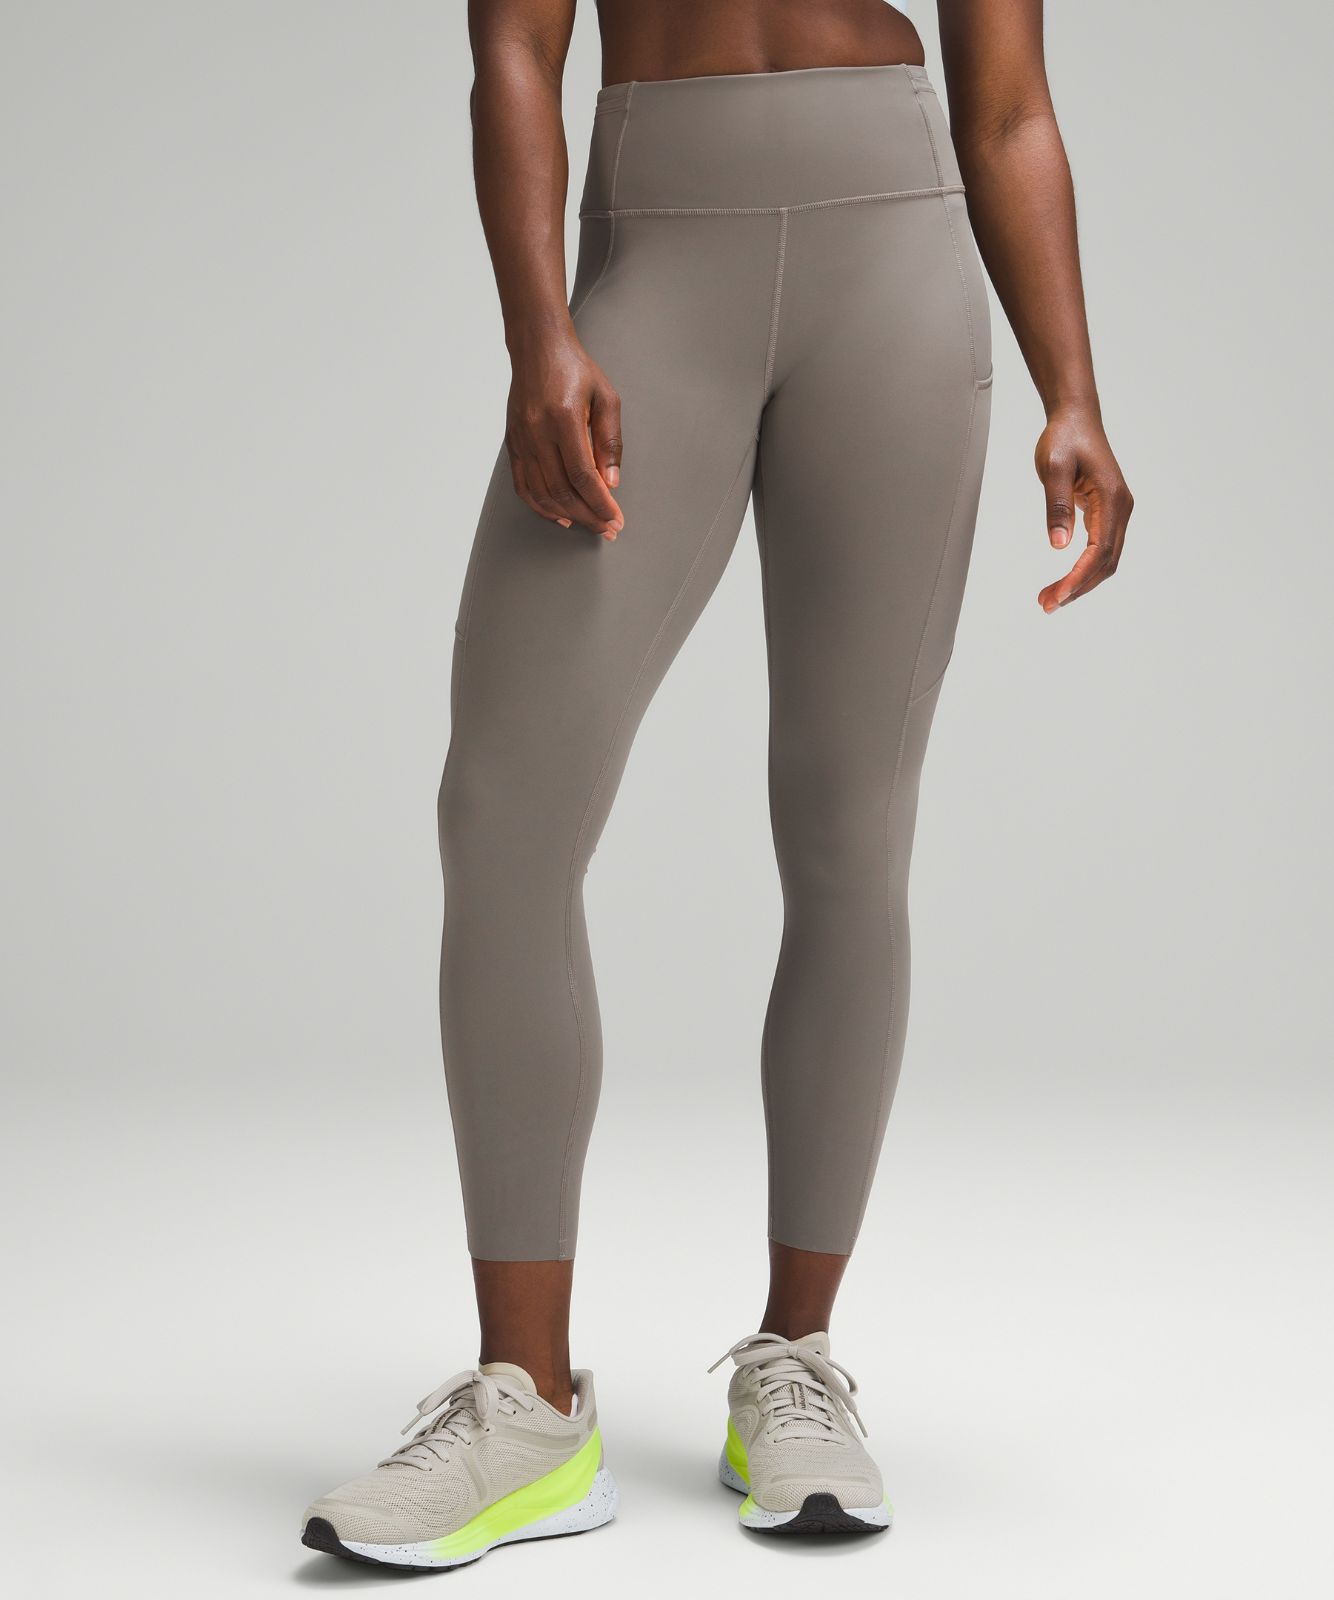 Fast and Free High-Rise Tight 25, Leggings